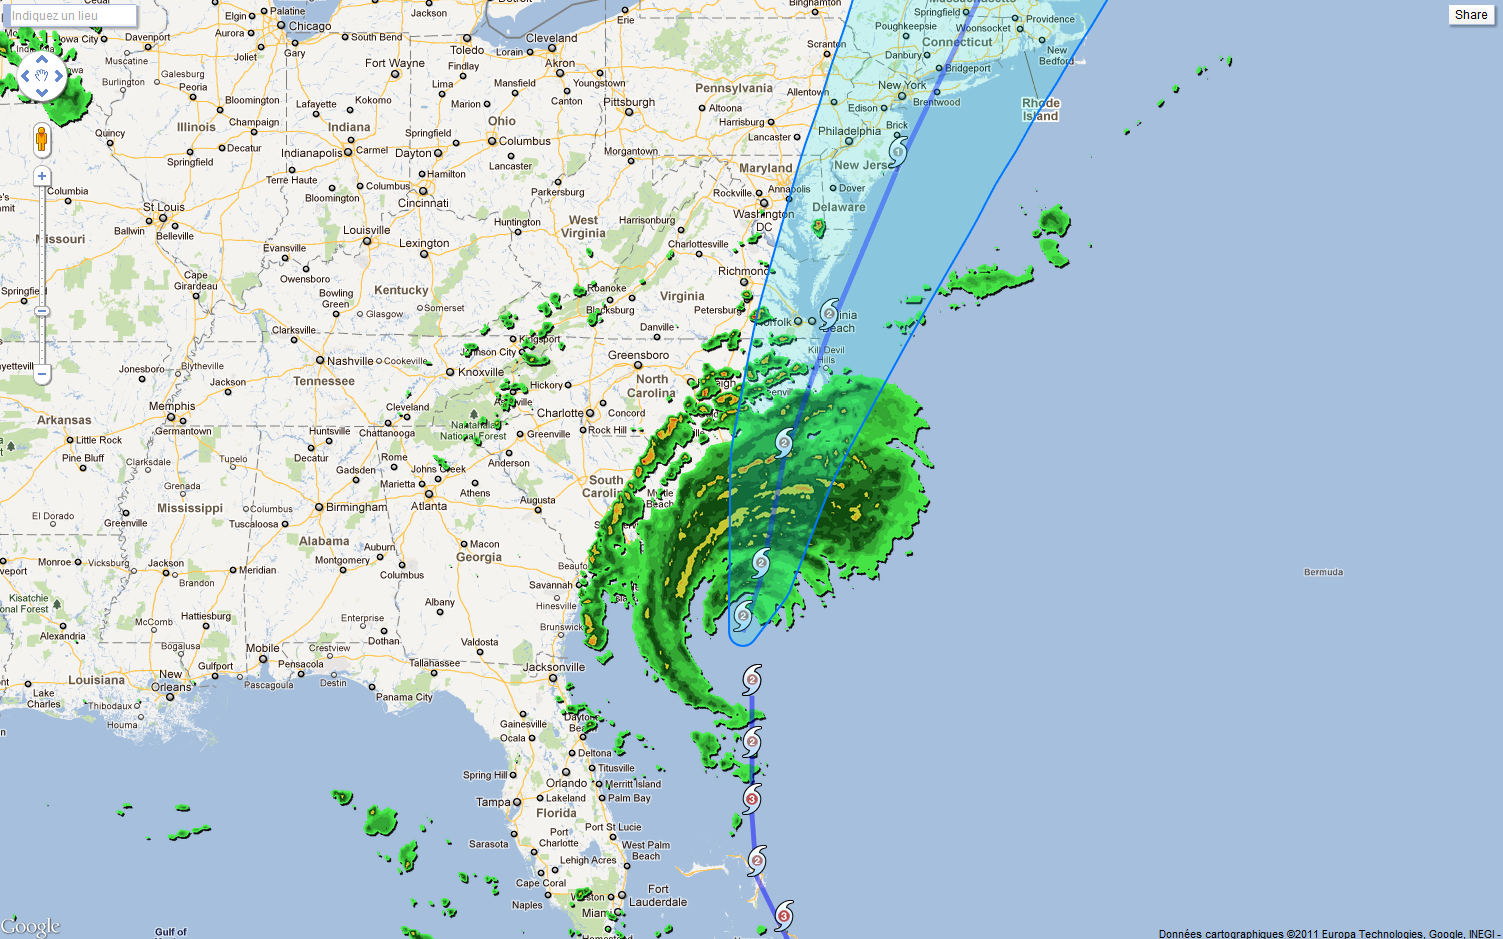 Following Hurricane Irene in New York with Google Maps in real time de F1JXQ1503 x 939